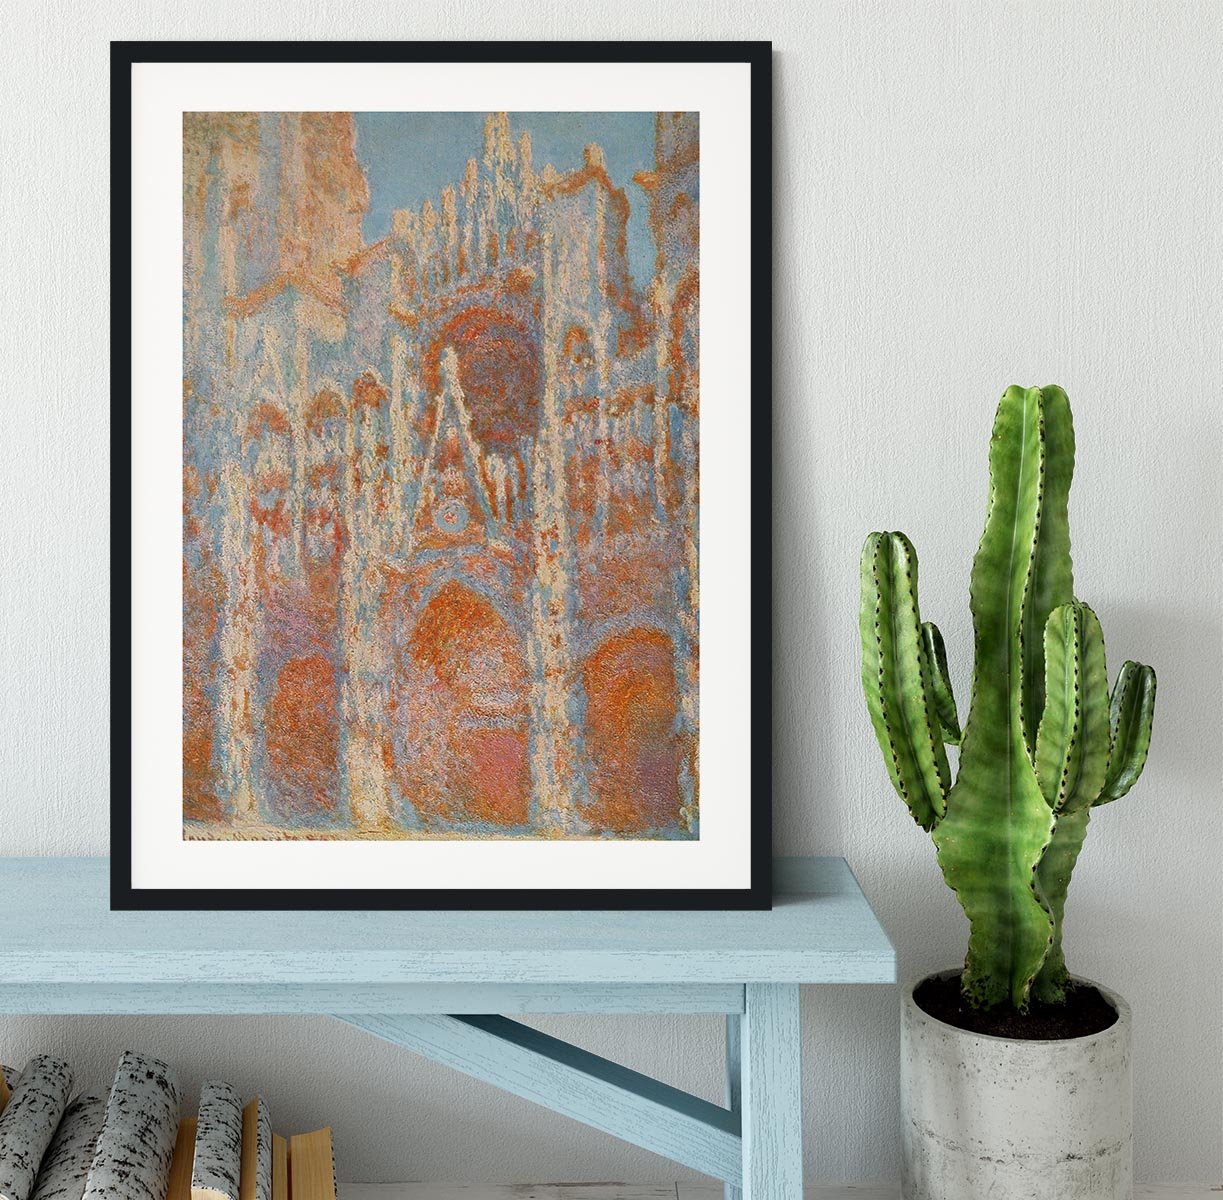 The Rouen Cathedral The facade at sunset by Monet Framed Print - Canvas Art Rocks - 1